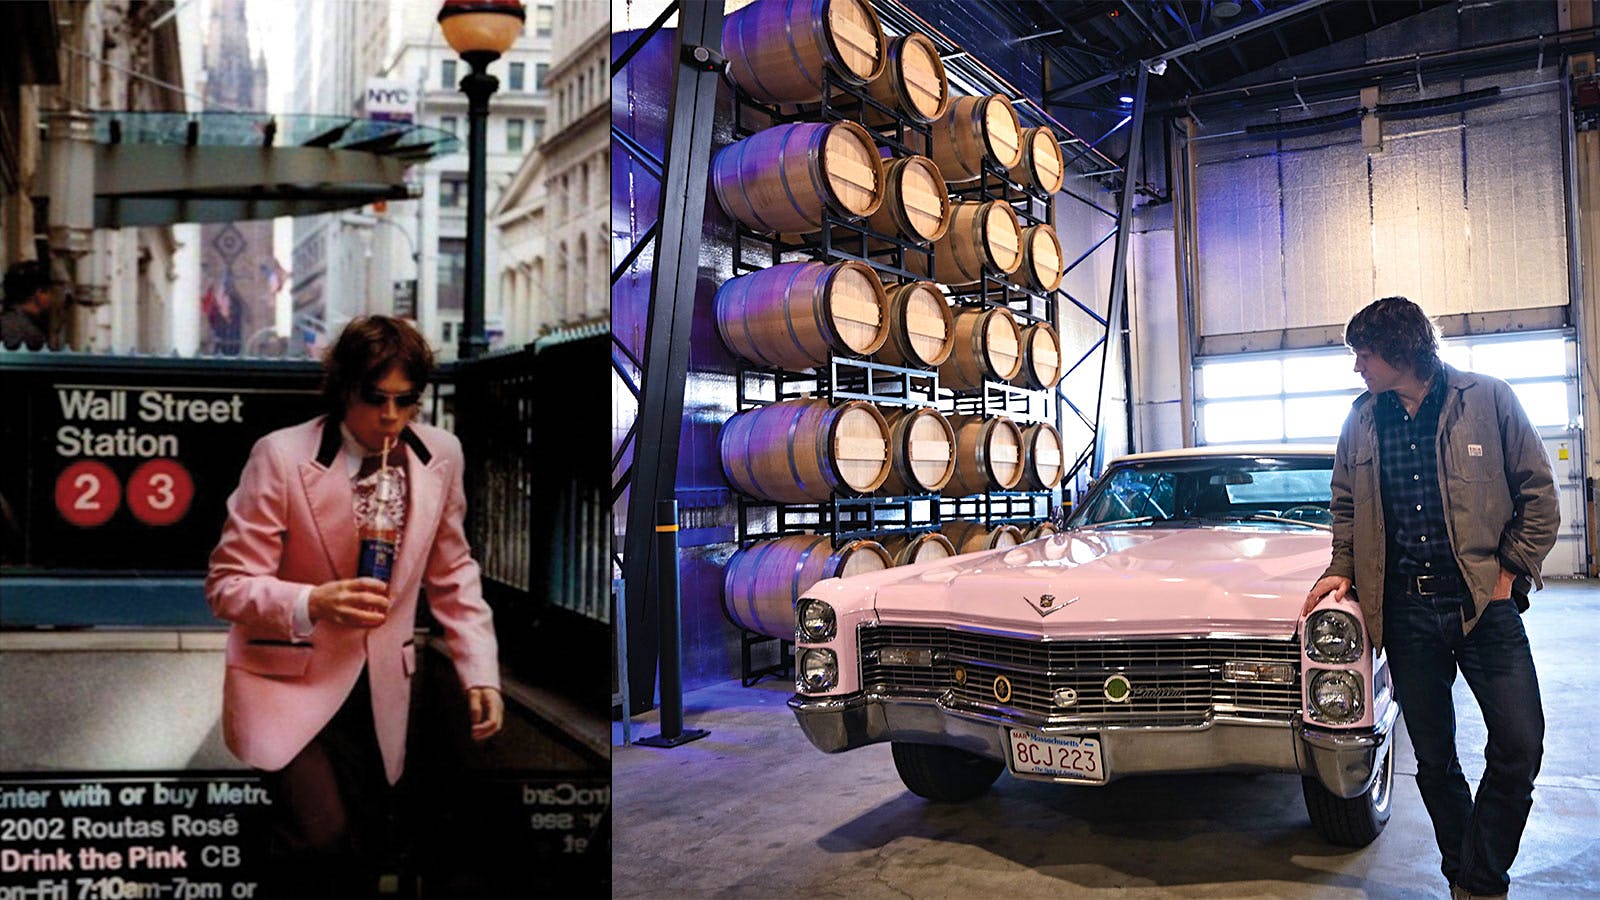 Charles Bieler Revs Up Pink '66 Cadillac for Great American Rosé Road Trip